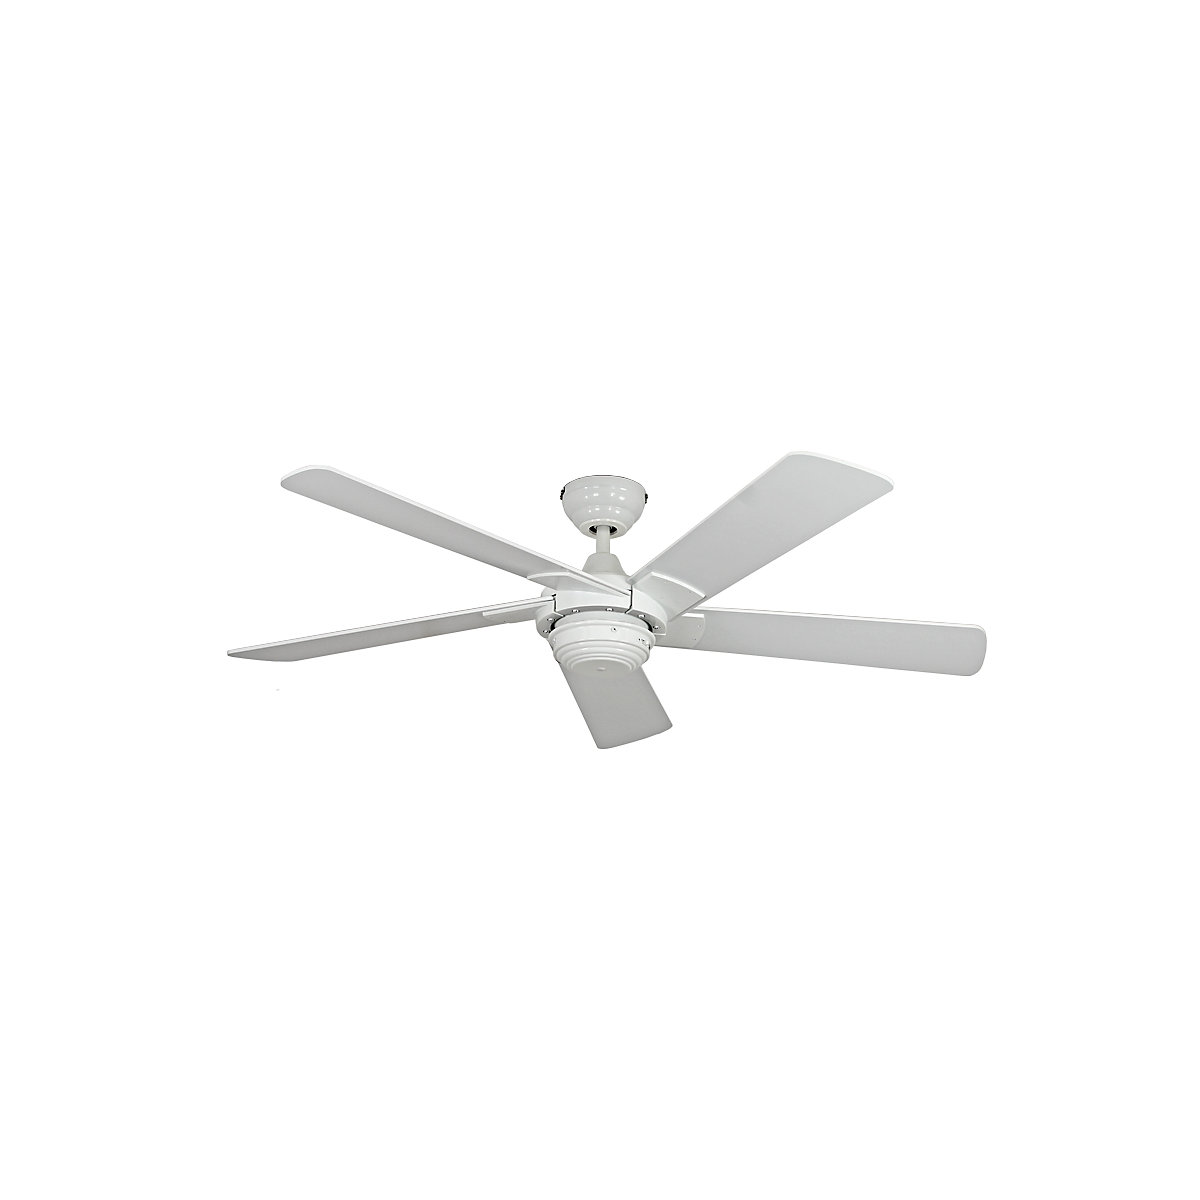 ROTARY ceiling fan, rotor blade Ø 1320 mm, with remote control, painted white-2